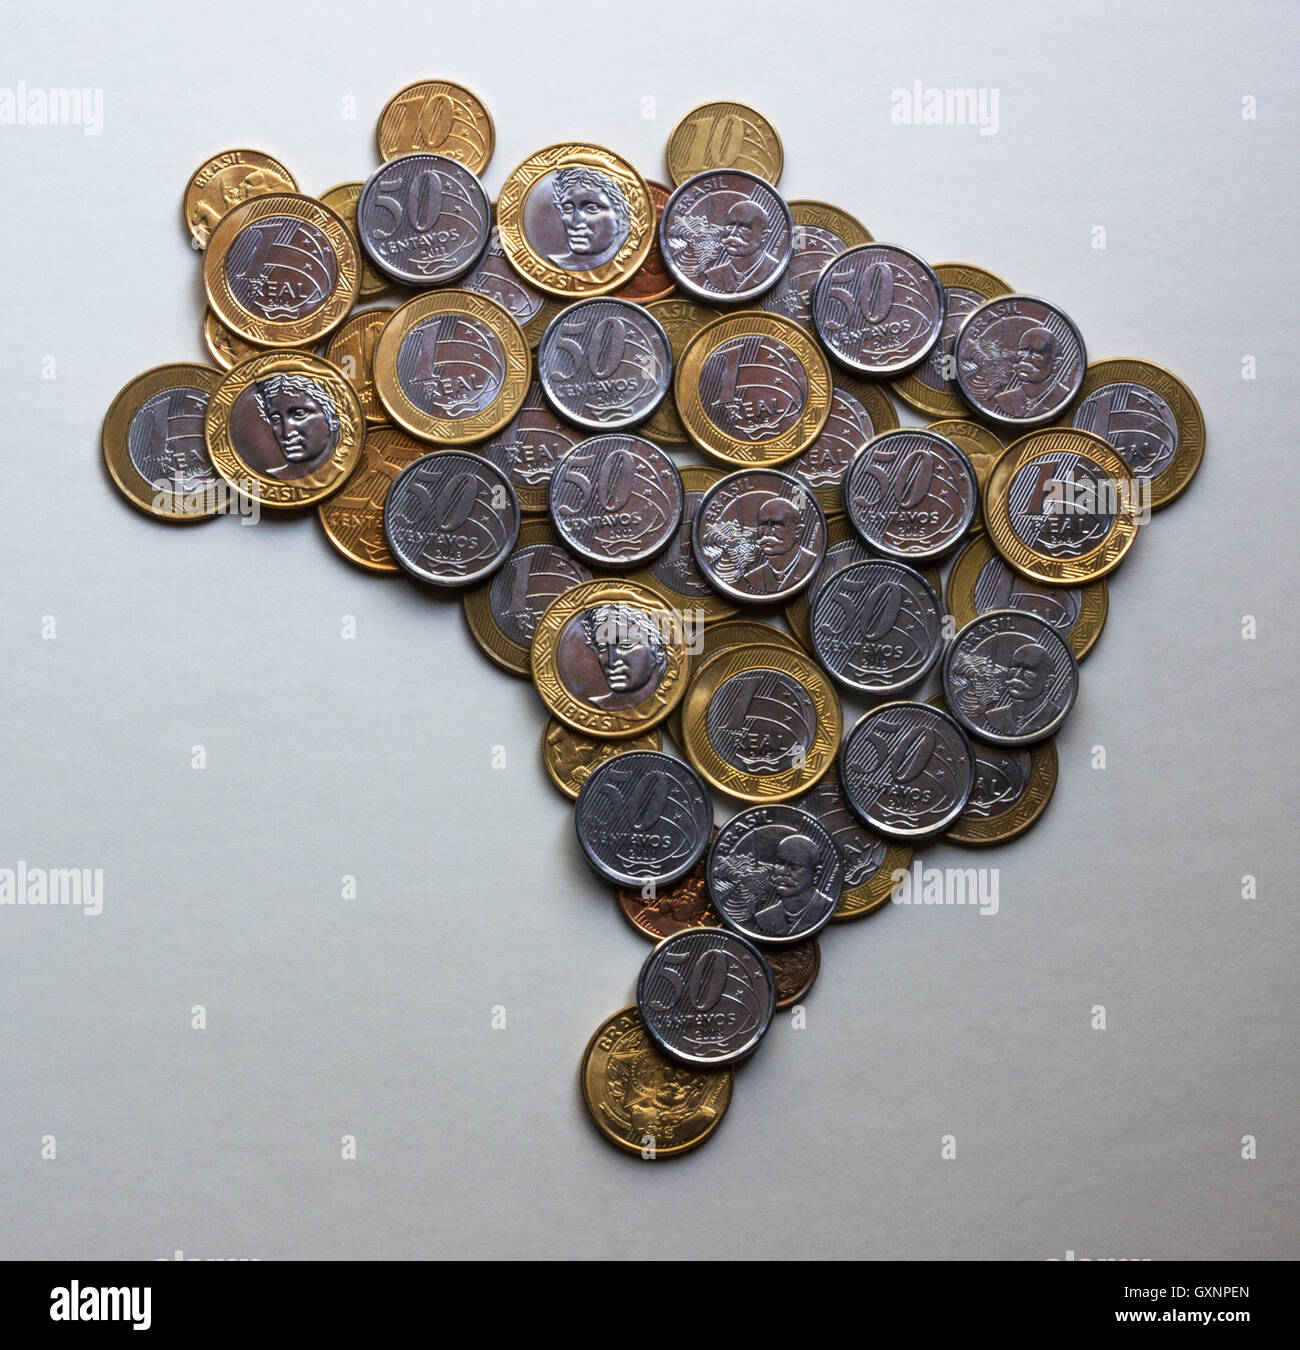 Brazil map with coins Stock Photo